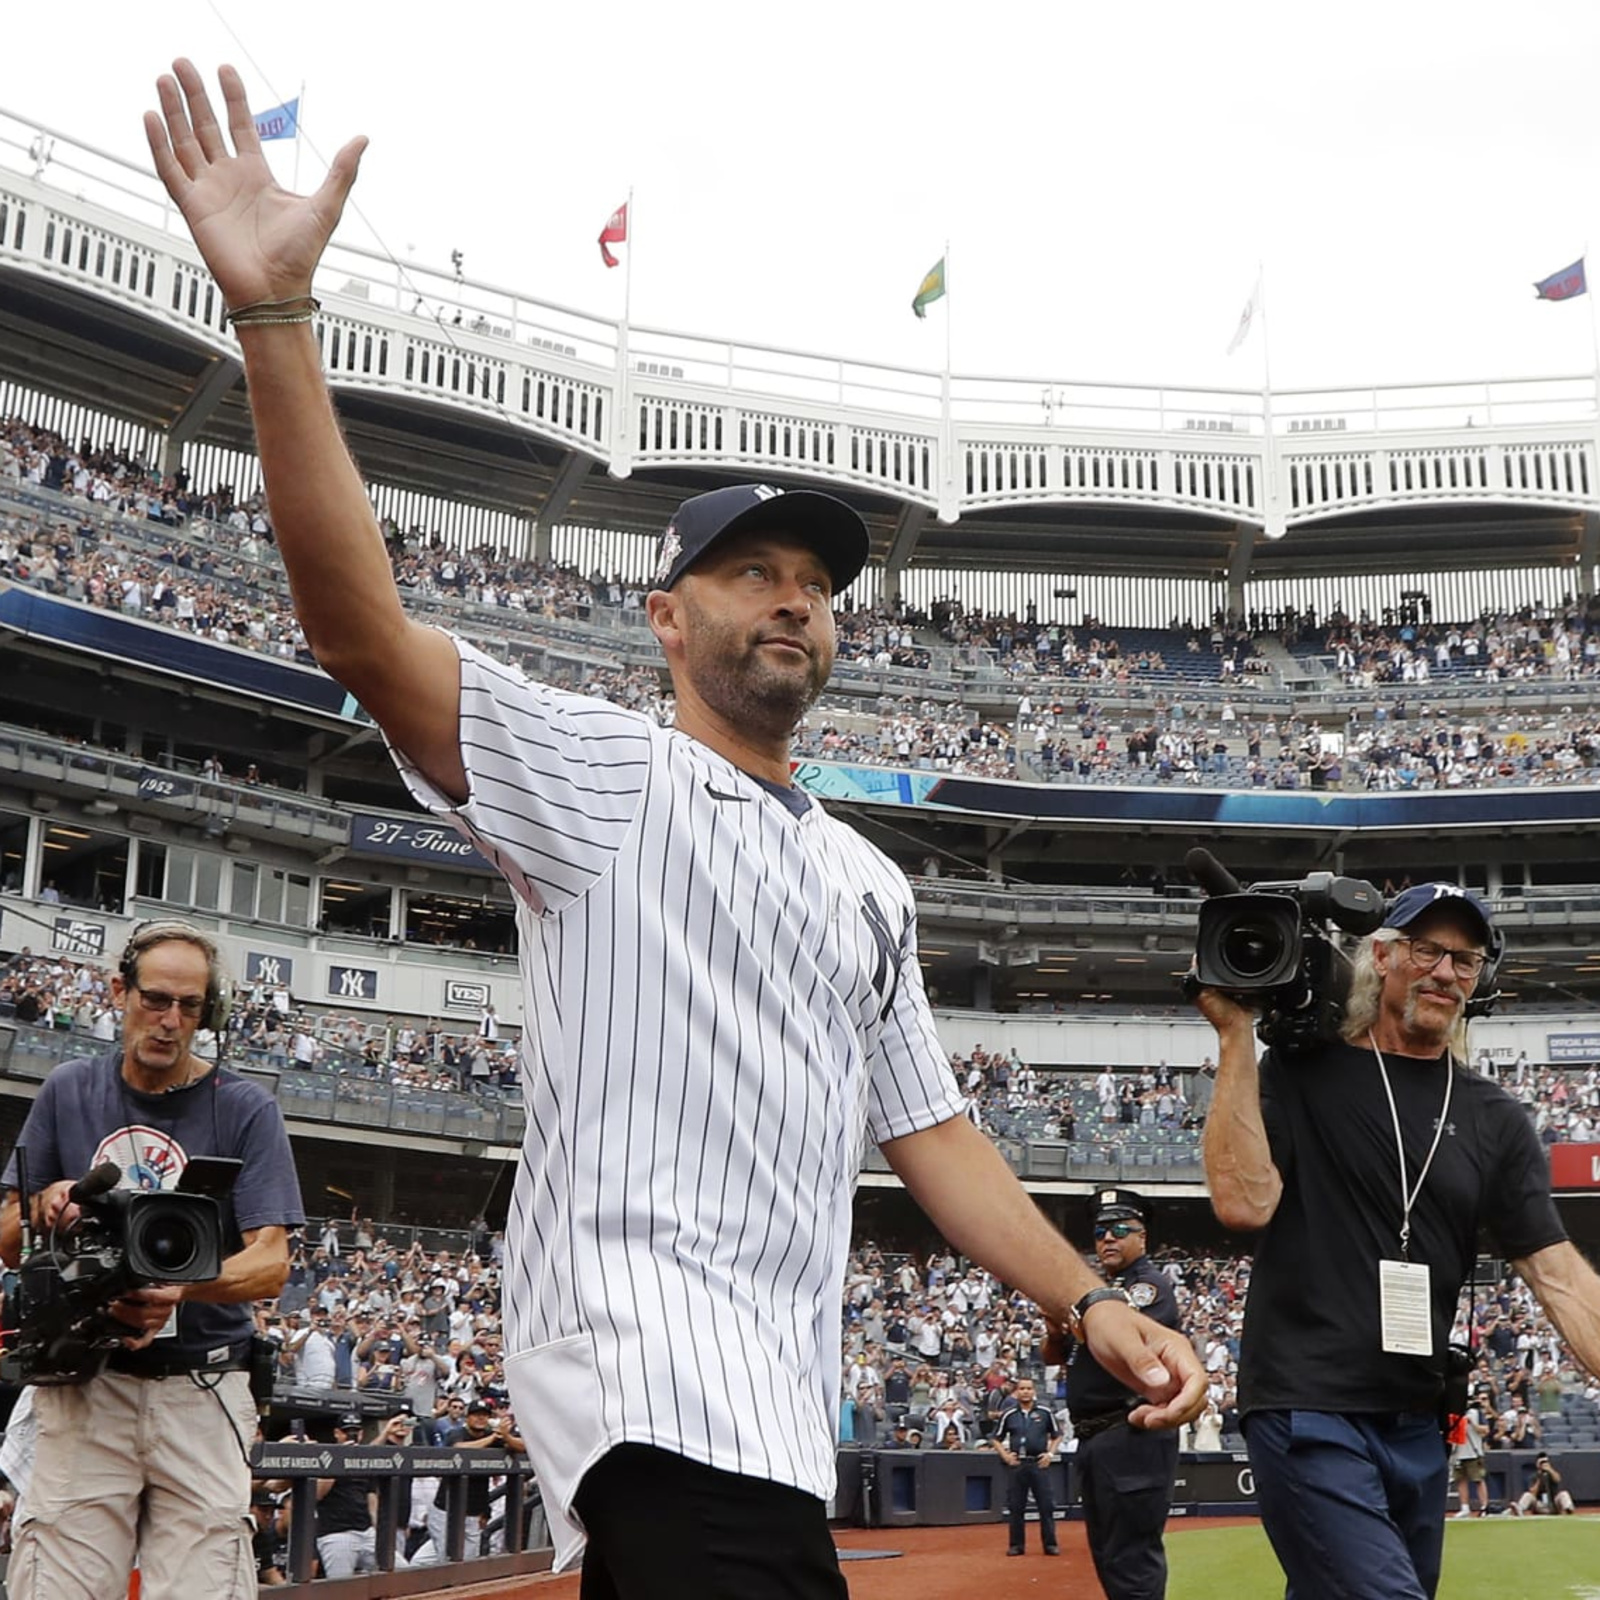 Andy Pettitte to make his NY Yankees' Old-Timer's Day debut